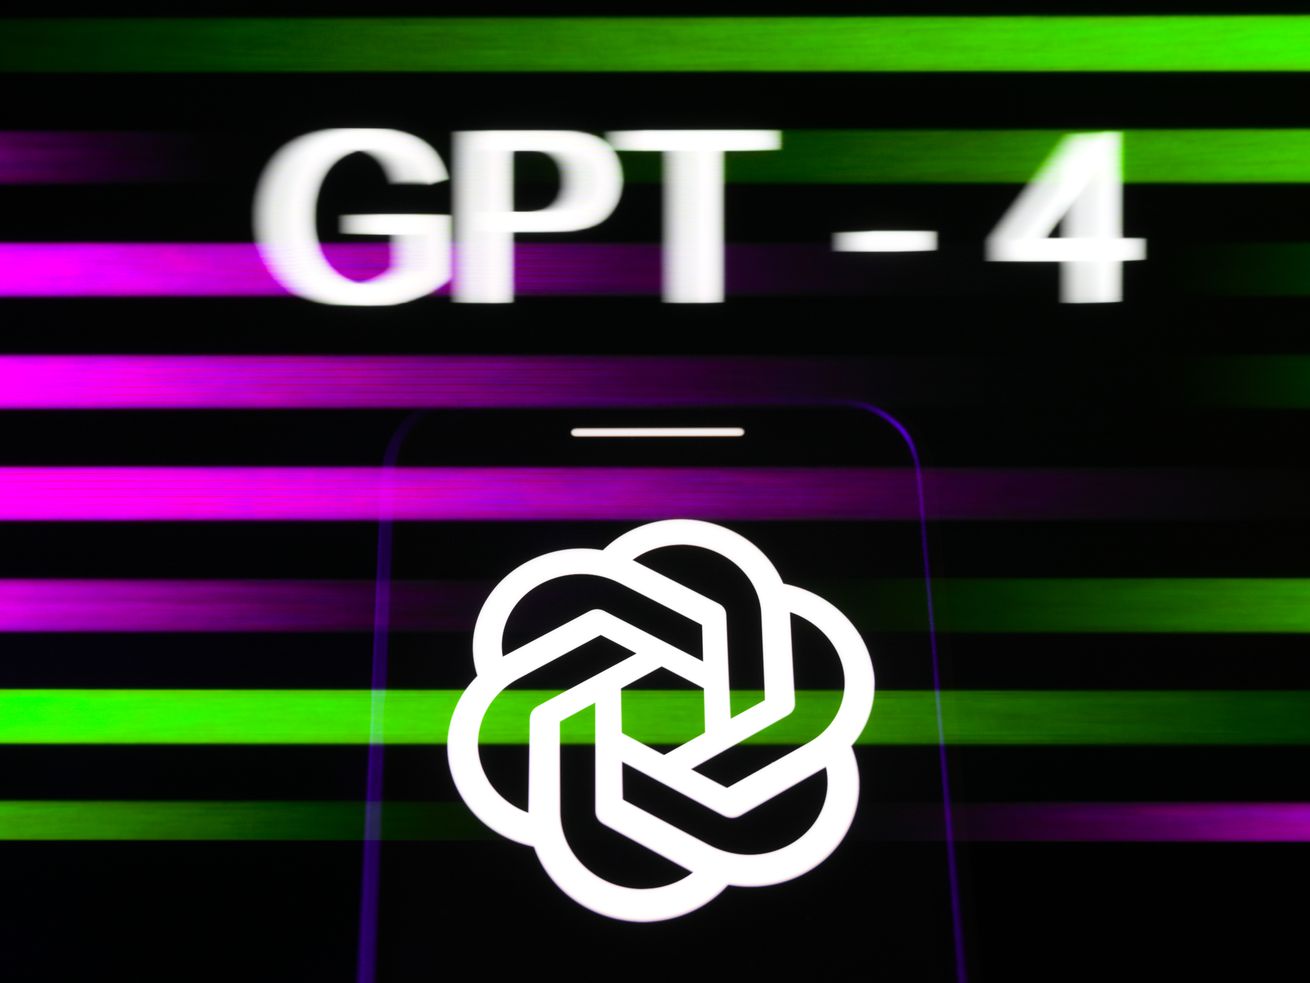 A graphic with horizontal purple and green lines, over which “GPT-4” and a flower shape are imposed.